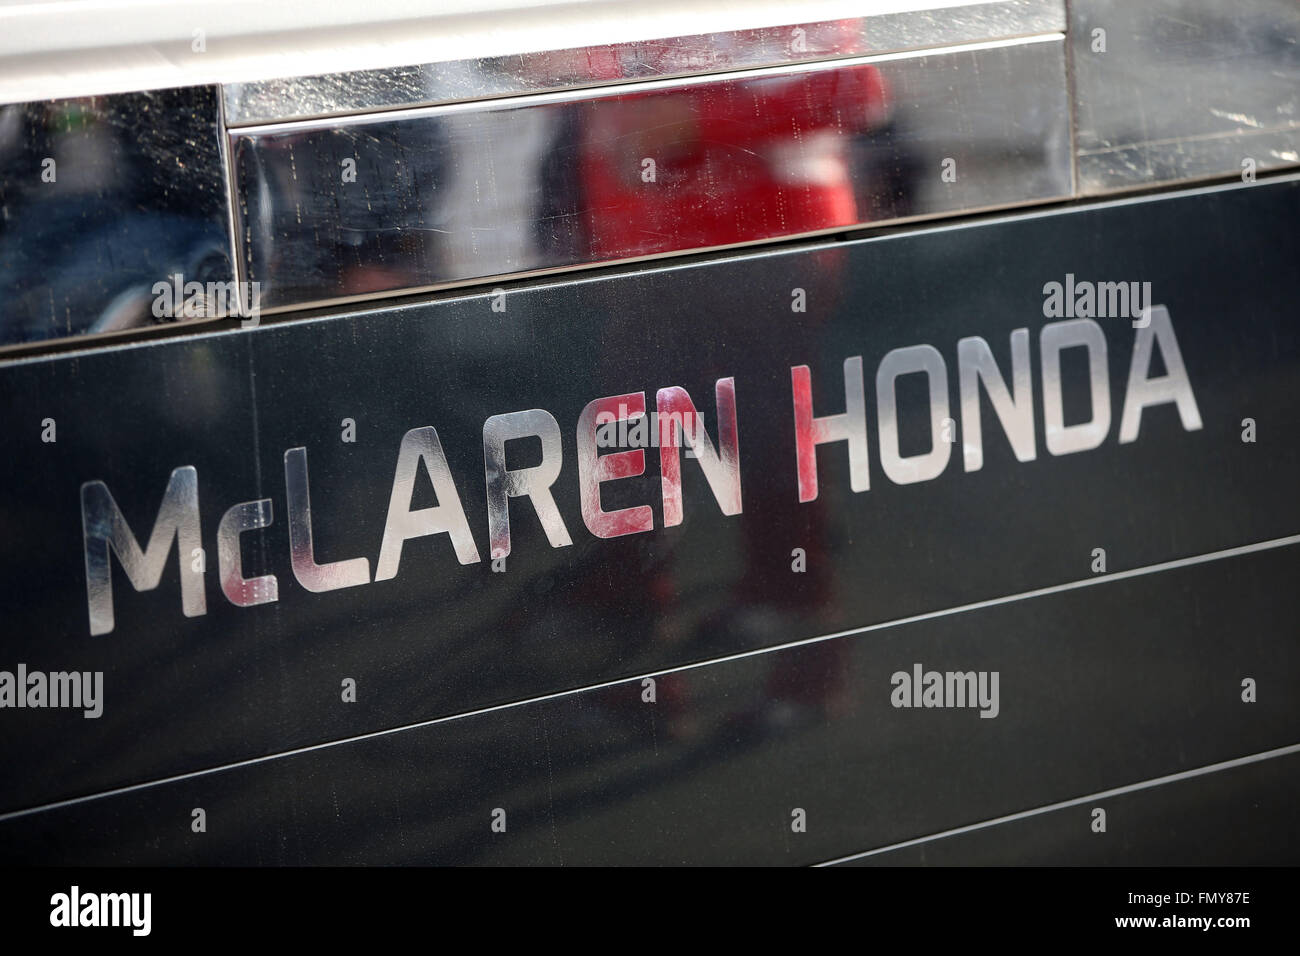 The motorhome of McLaren Honda seen during the training session for the upcoming Formula One season at the Circuit de Barcelona - Catalunya in Barcelona, Spain, 23 February 2016. Photo: Jens Buettner/dpa Stock Photo